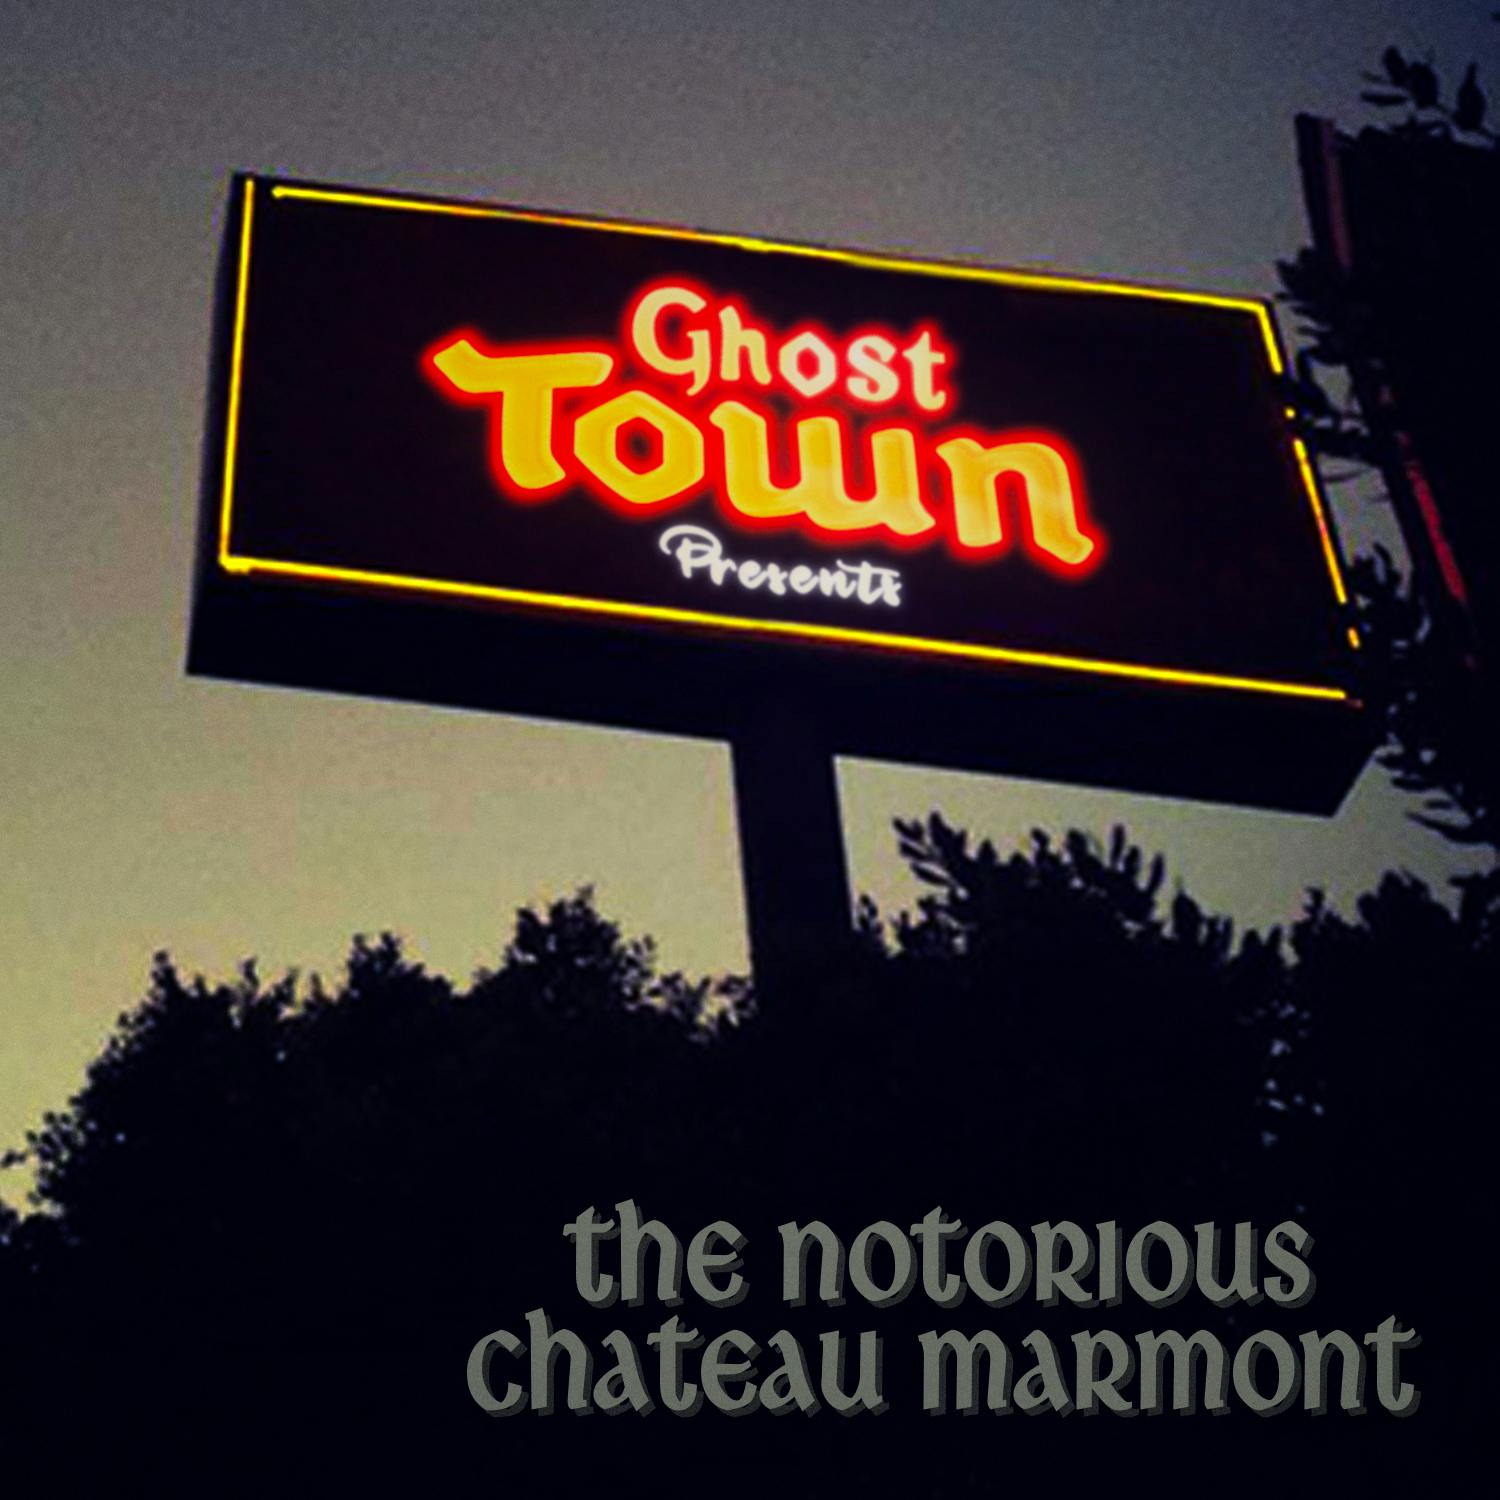 Ghost Town Presents: The Notorious Chateau Marmont